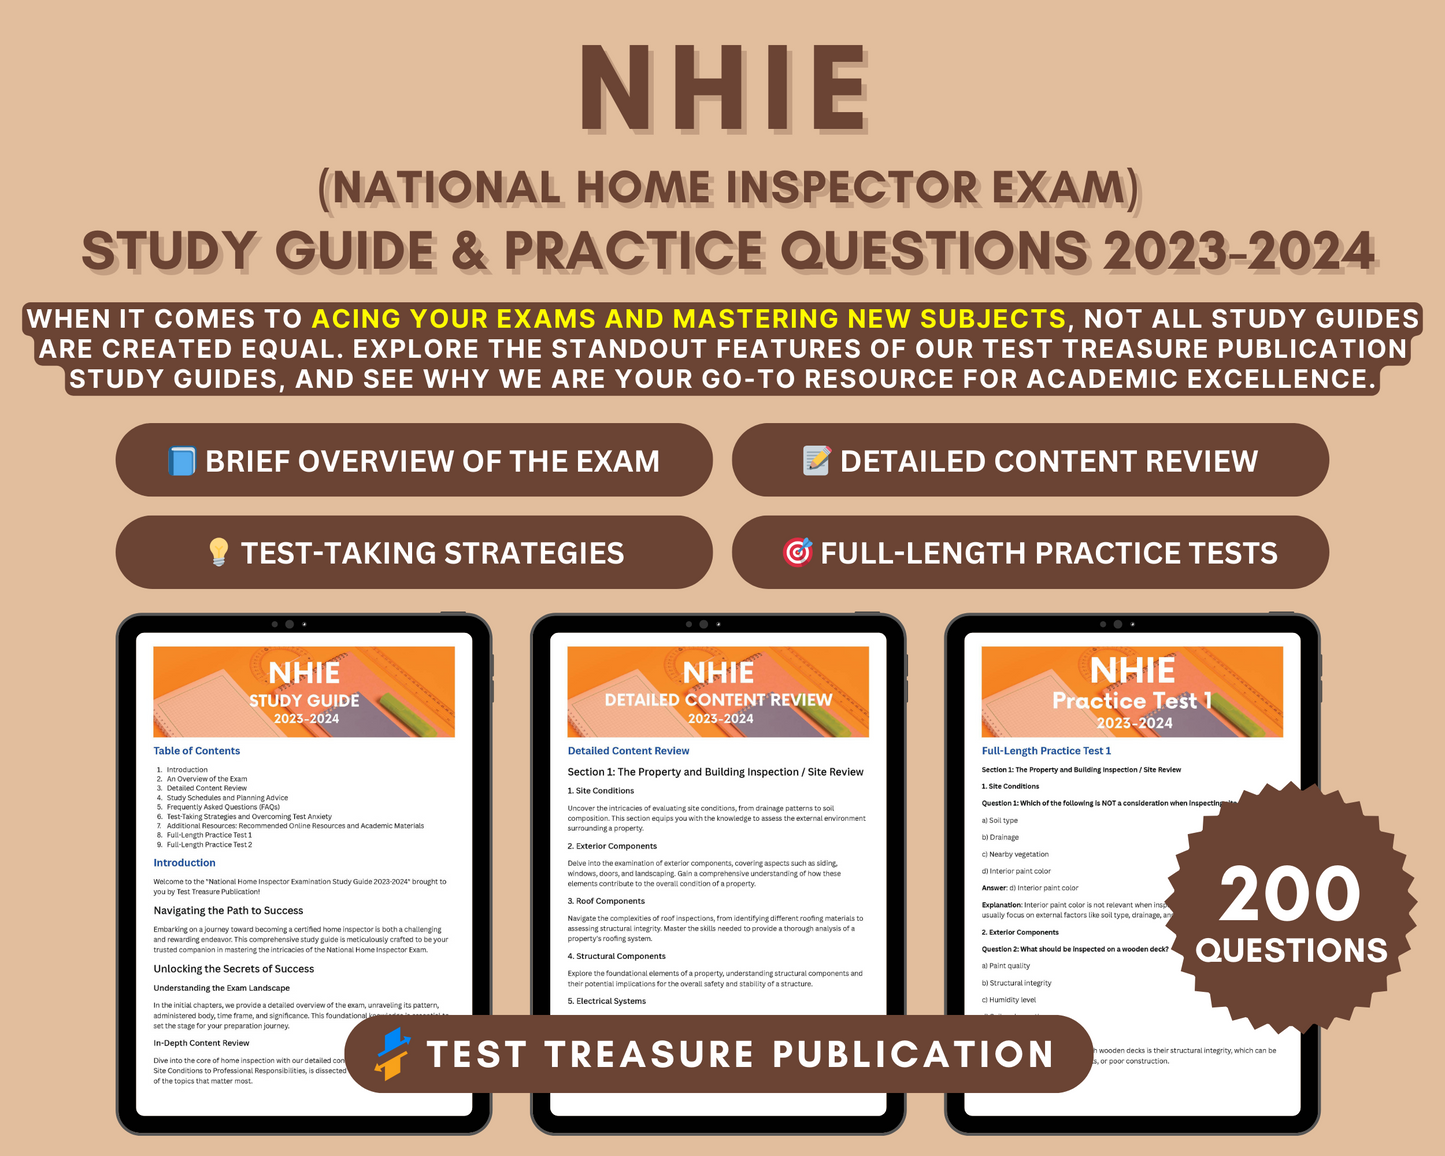 National Home Inspector Exam Study Guide 2023-24: In-Depth Content Review, Practice Test & Exam Tips for Home Inspectors